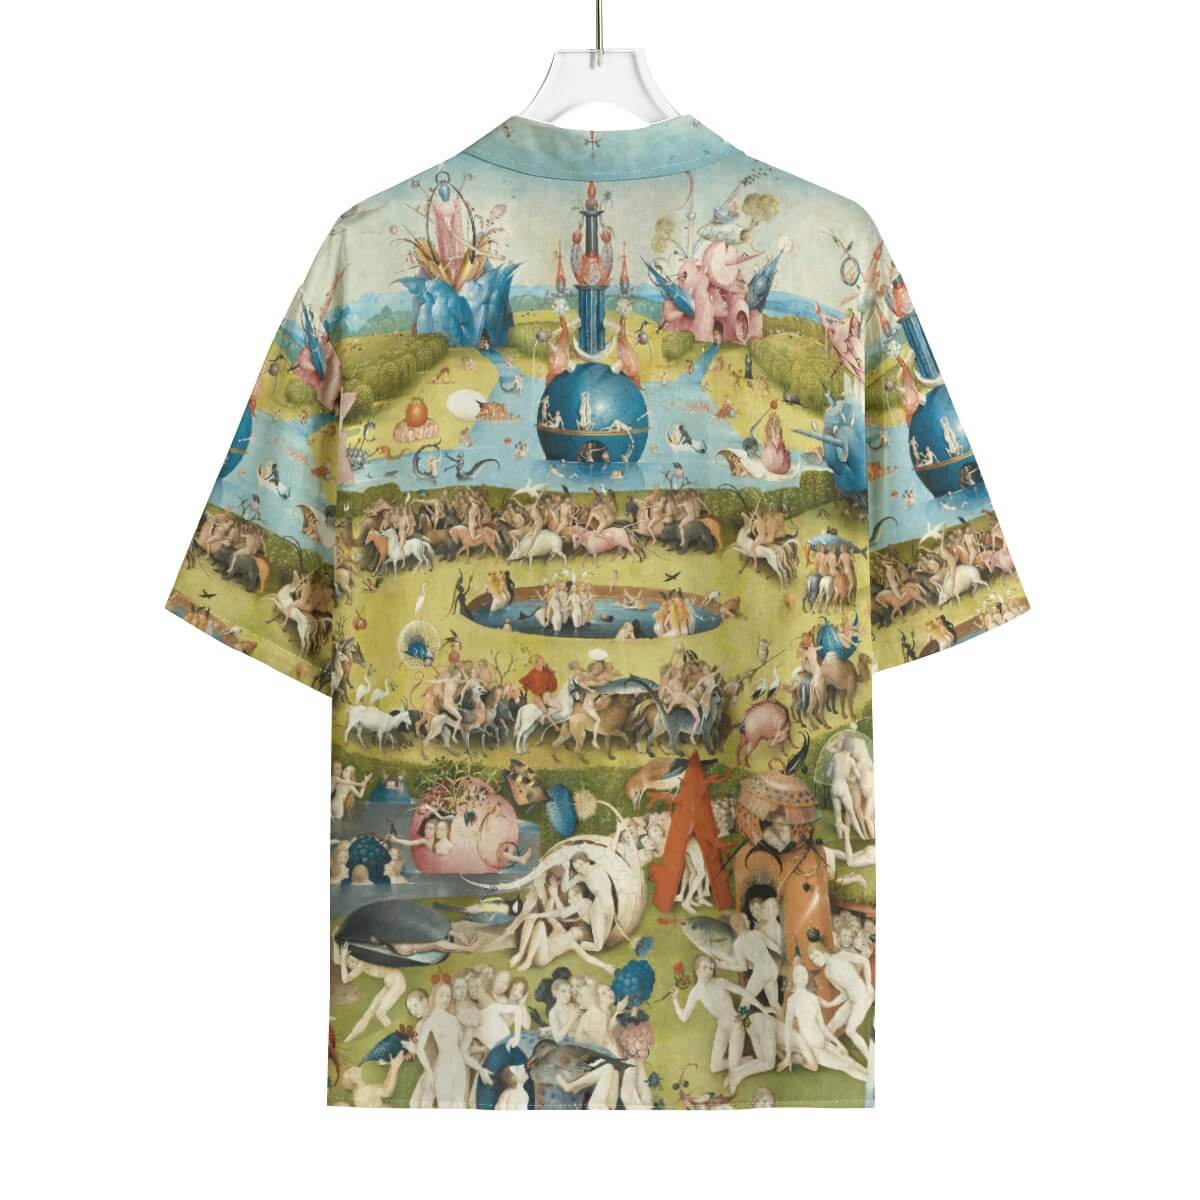 Men's Apparel with Earthly Delights Print